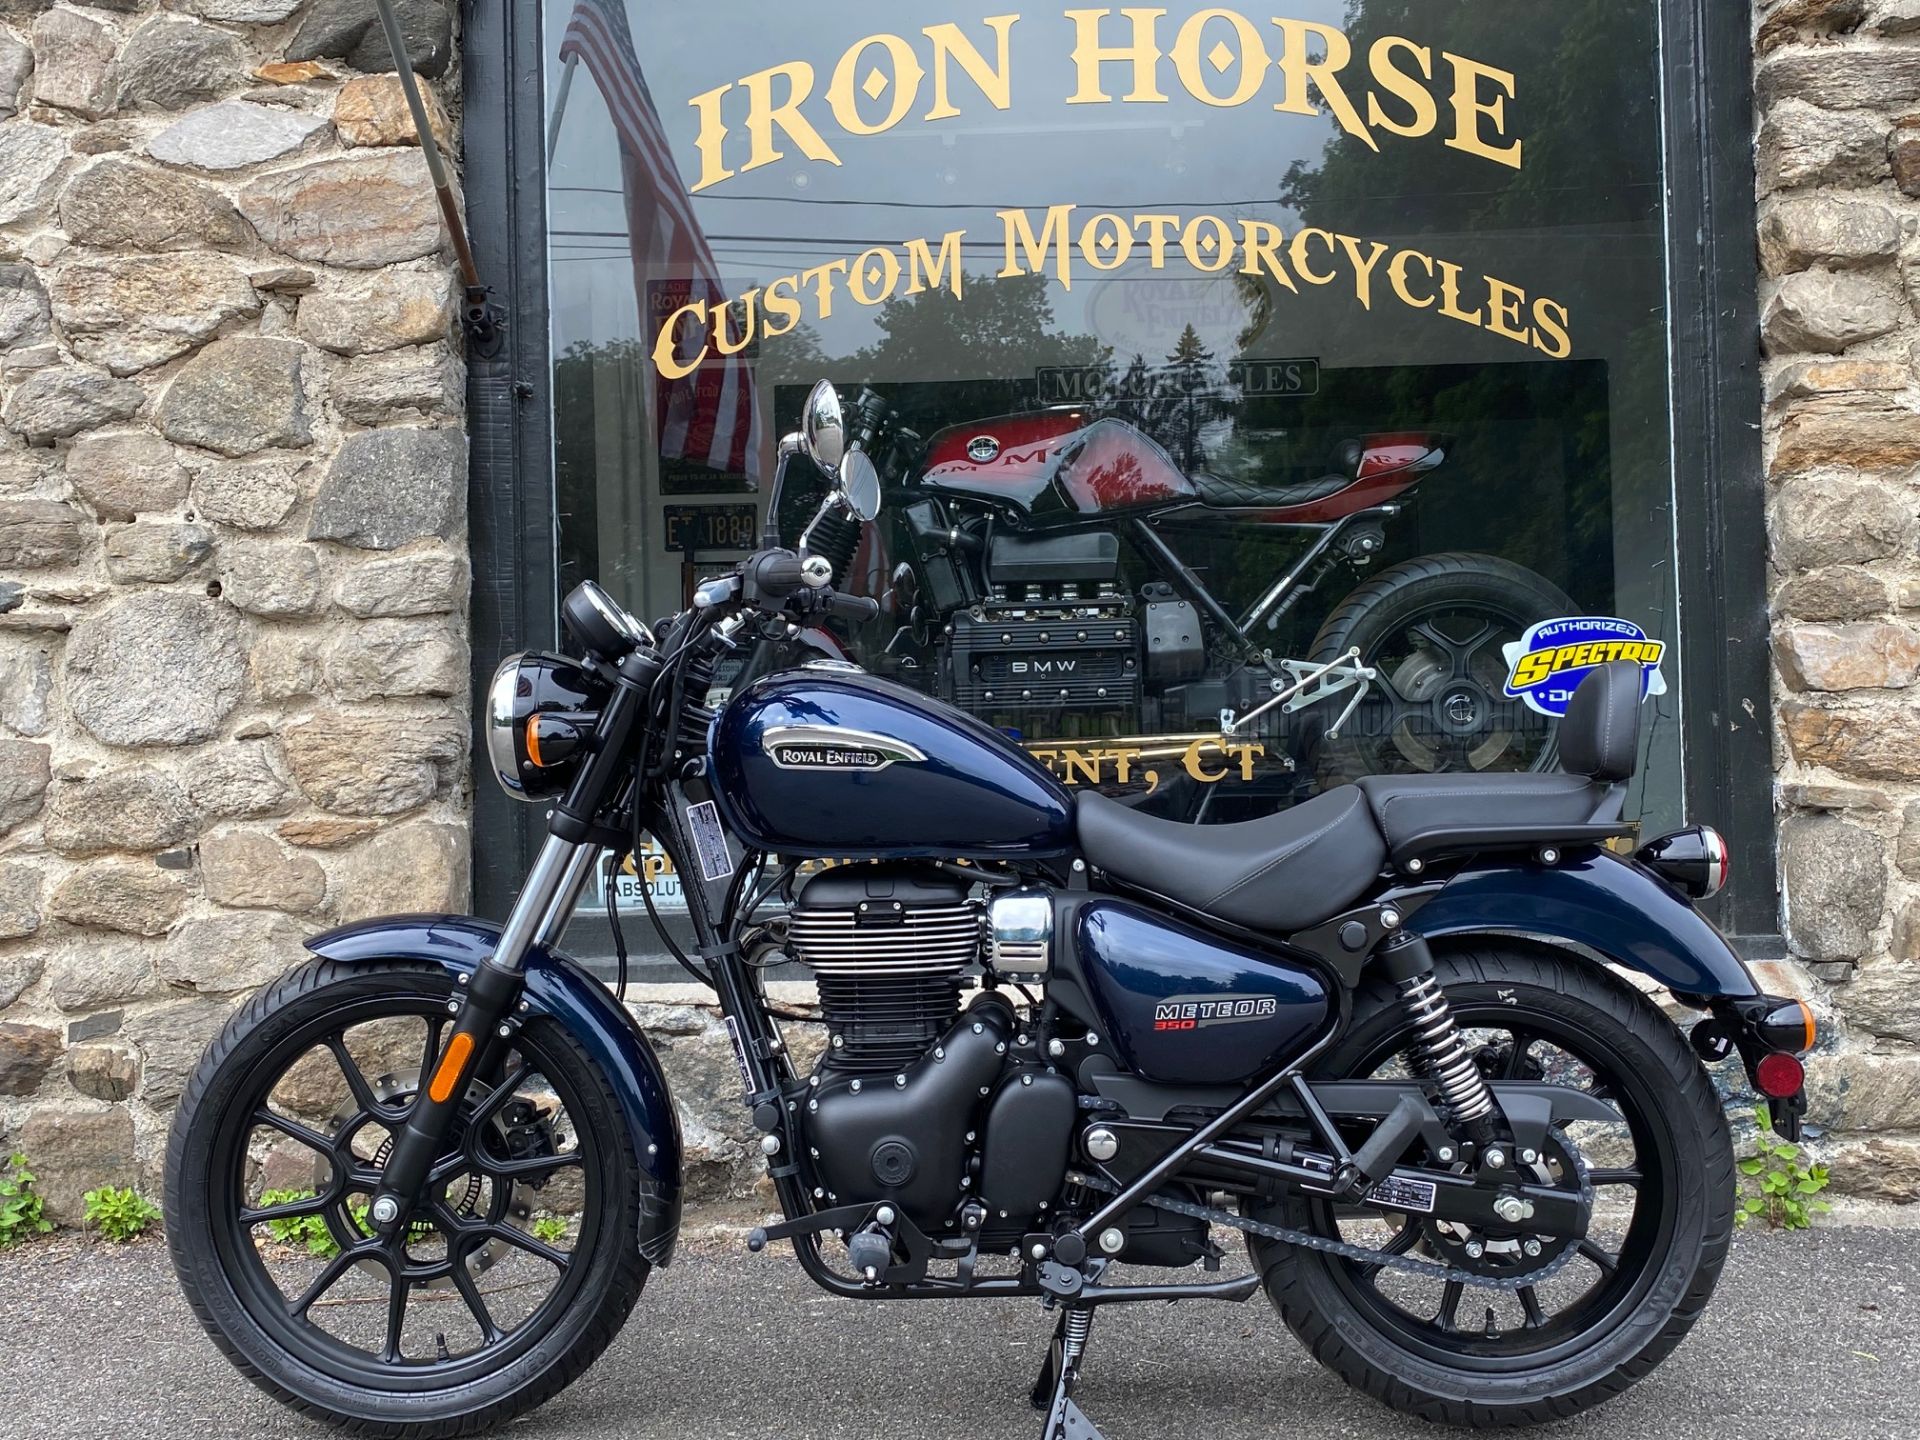 2022 Royal Enfield Meteor 350 in Kent, Connecticut